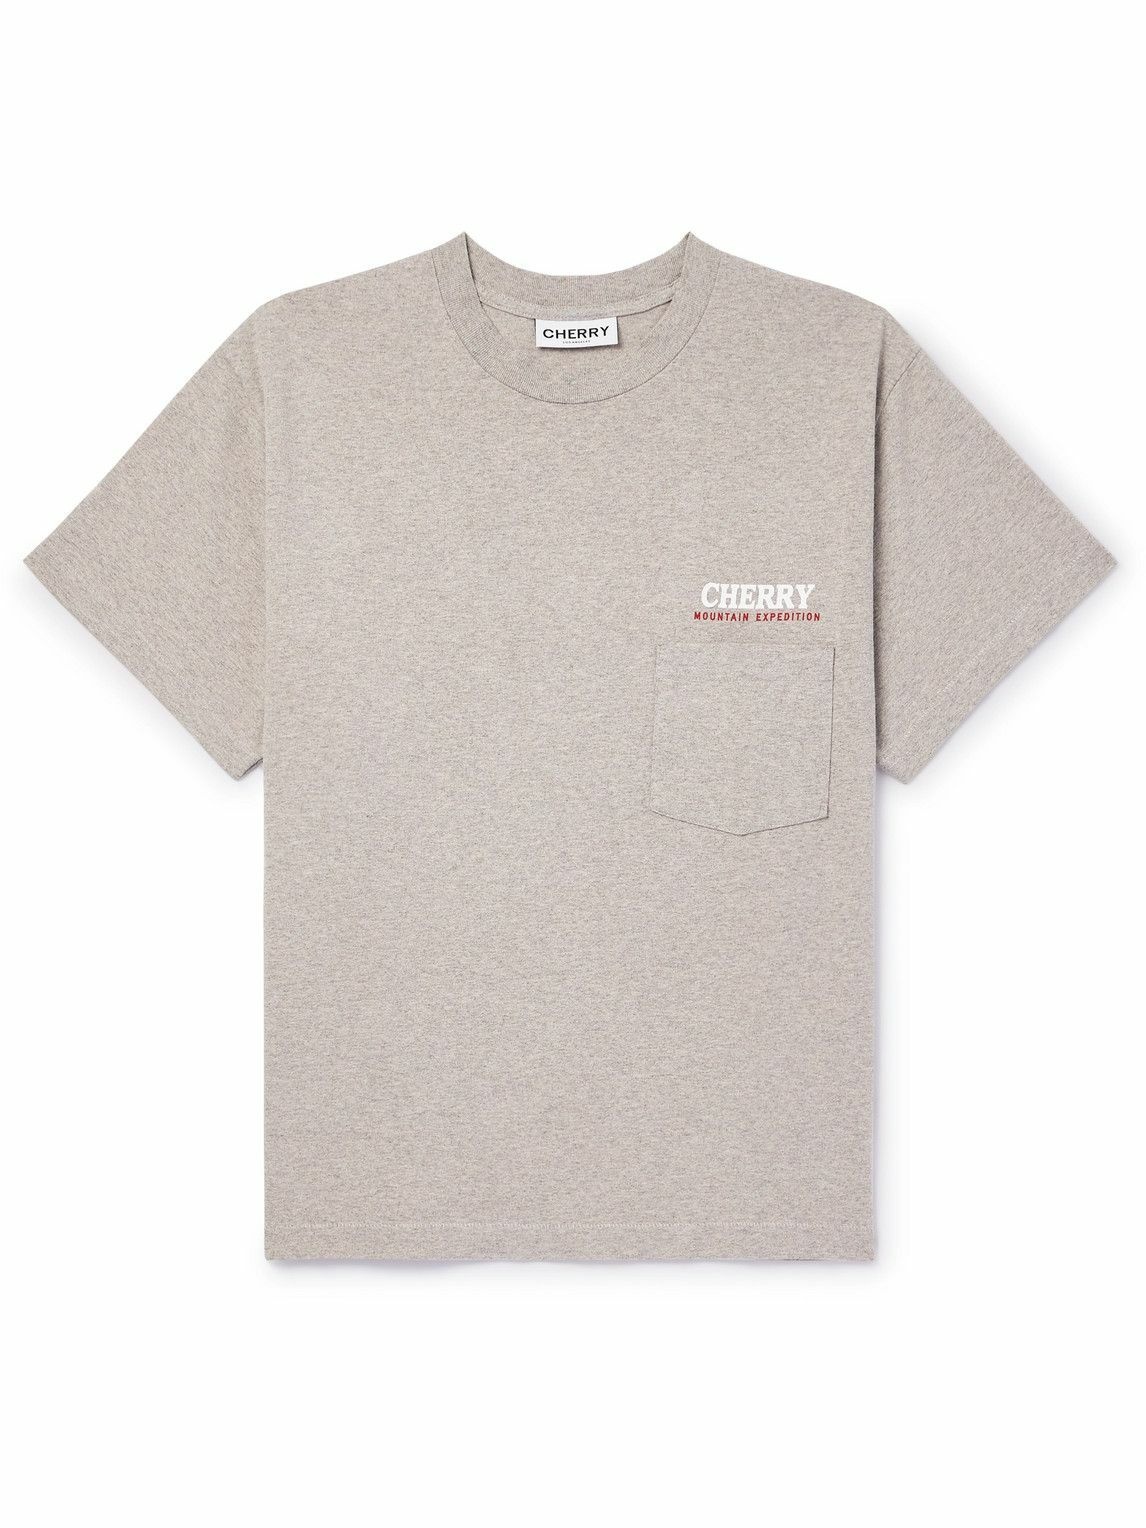 Photo: Cherry Los Angeles - Mountain Expedition Garment-Dyed Logo-Print Cotton-Jersey T-Shirt - Neutrals